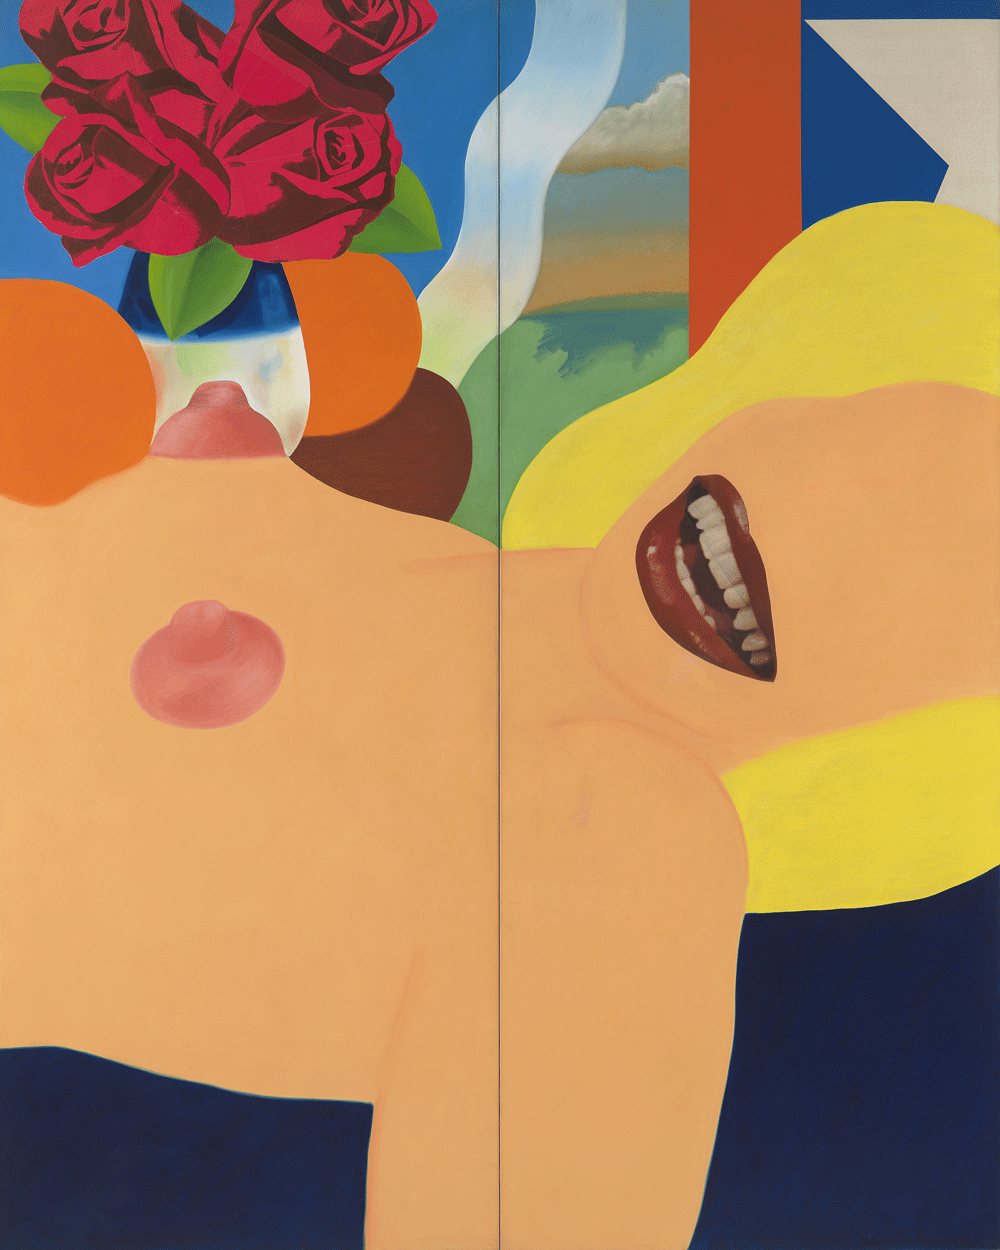 Tom Wesselmann Great American Nude #53, 1964 Huile et collage sur toile / oil and collage on canvas 304,8x243,84 cm /120 x 96 inches © The Estate of Tom Wesselmann/ Licensed by VAGA, New York